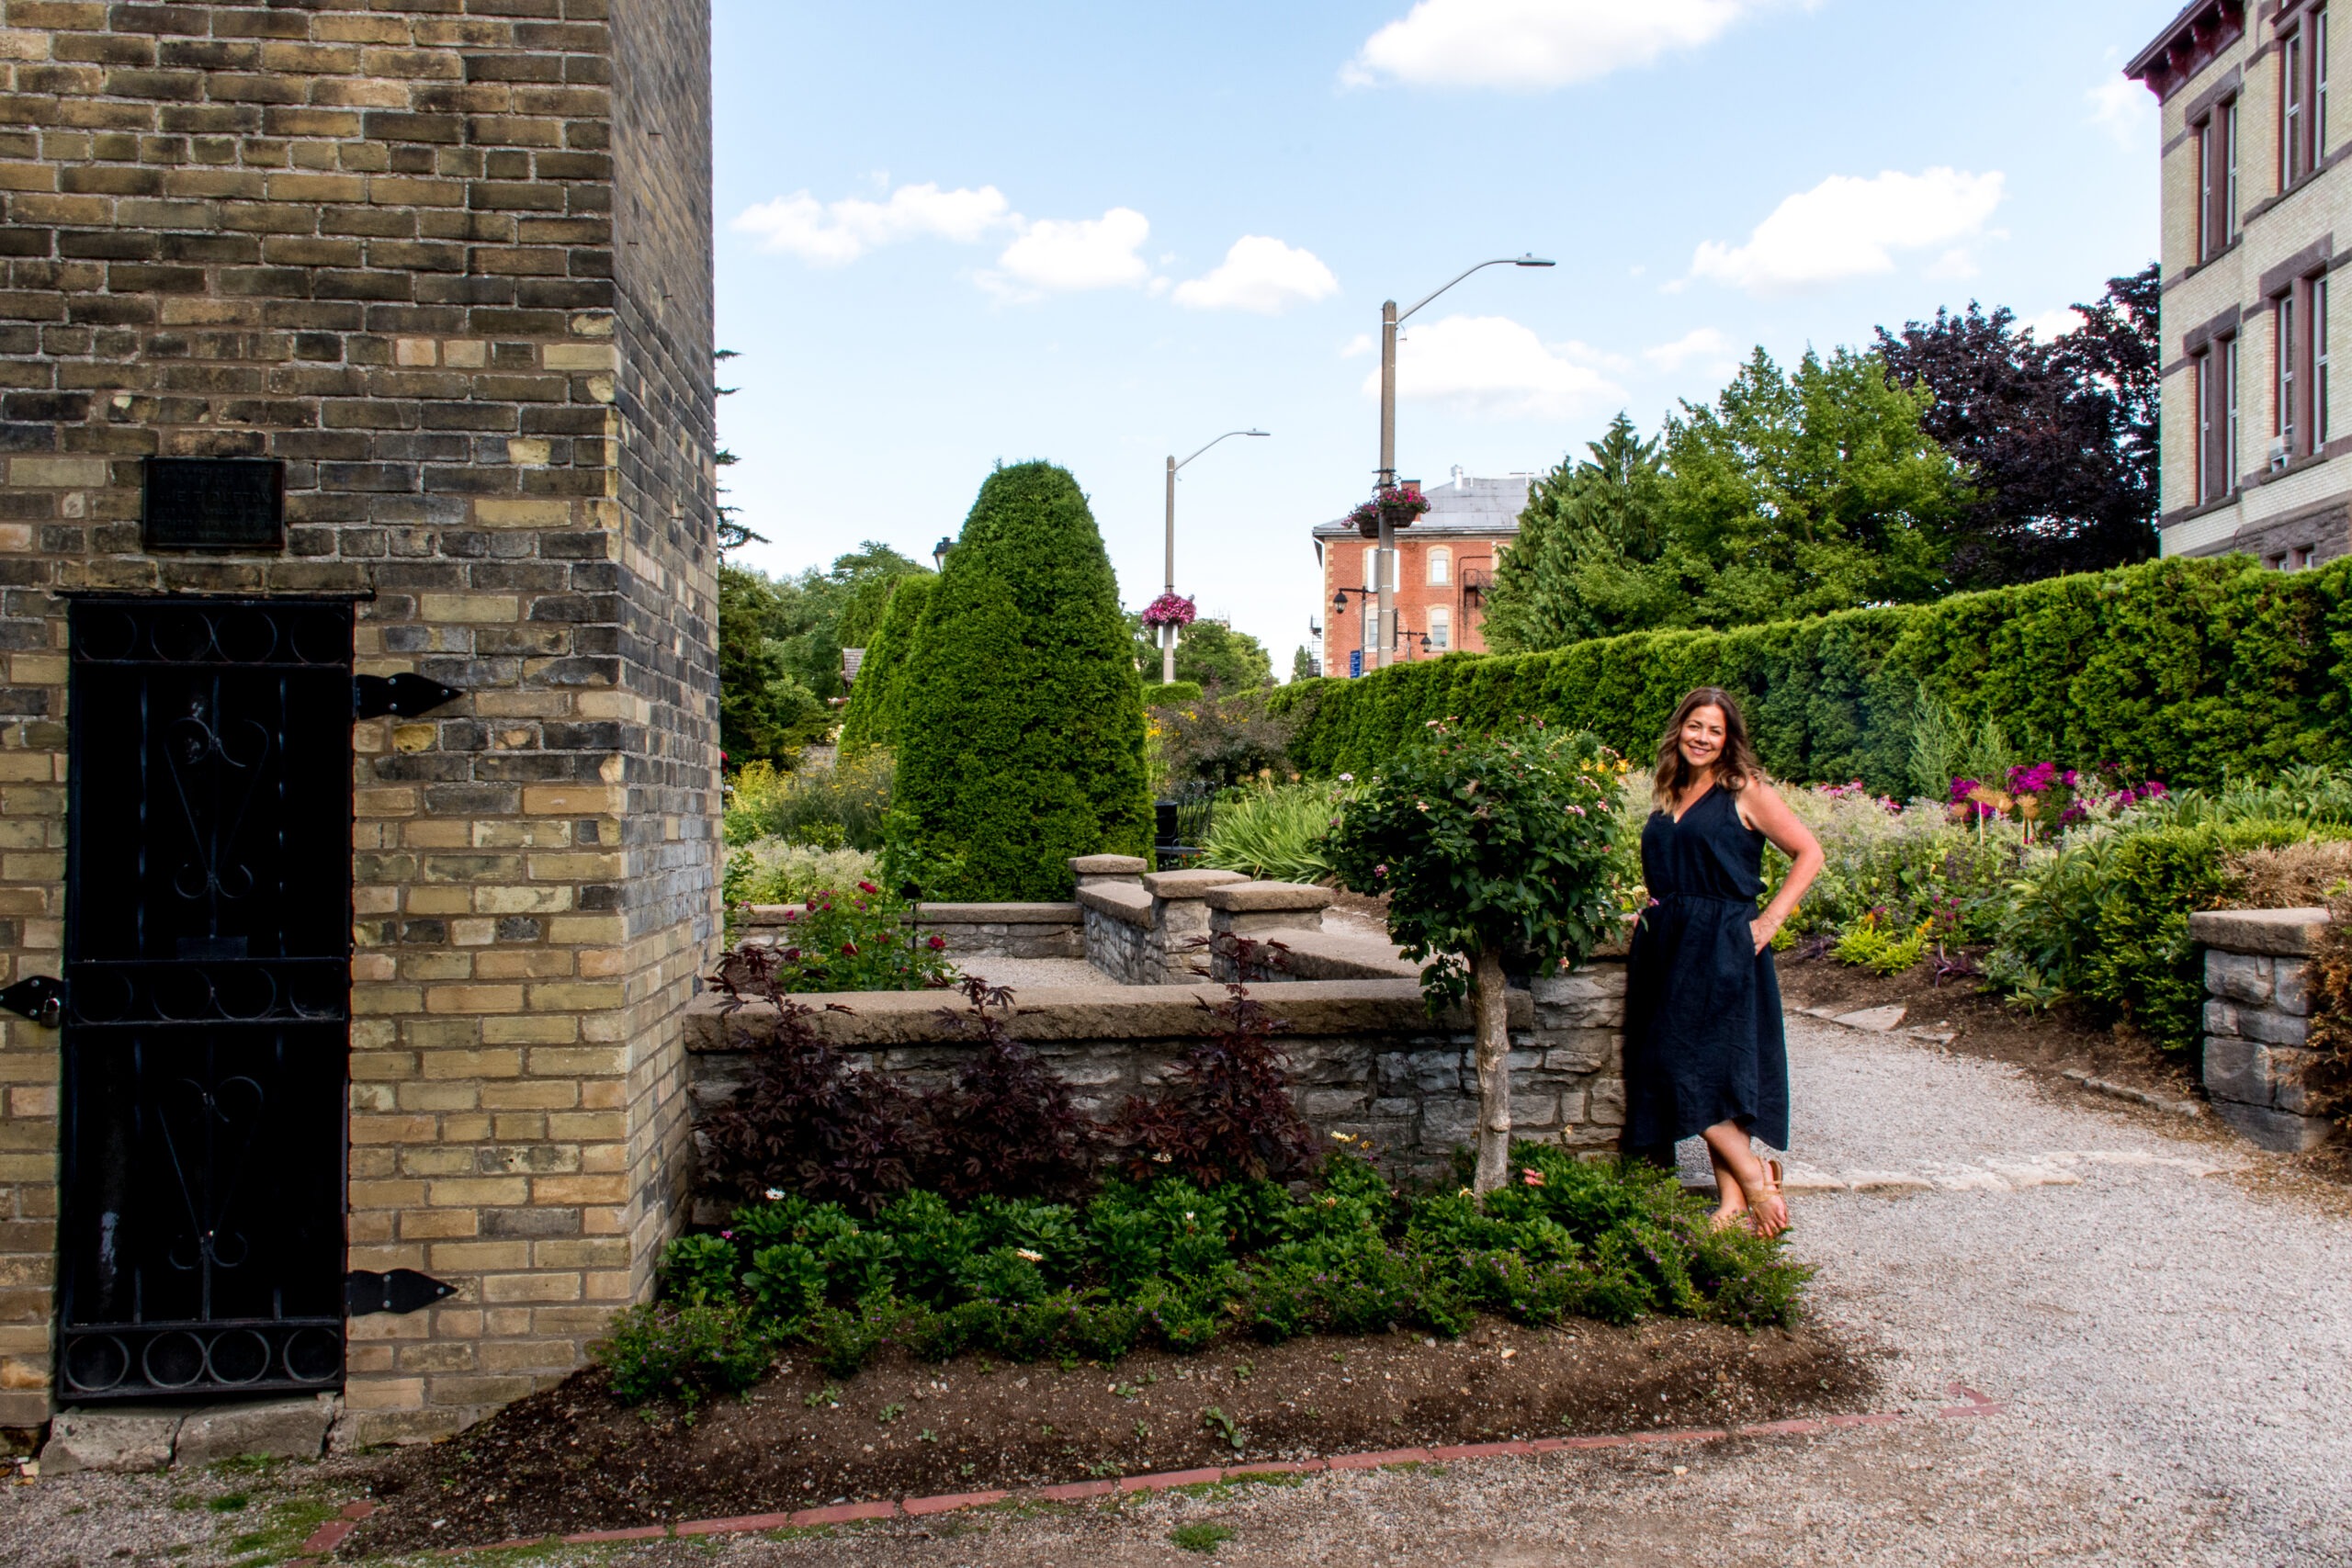 gardens with woman in stratford ontario